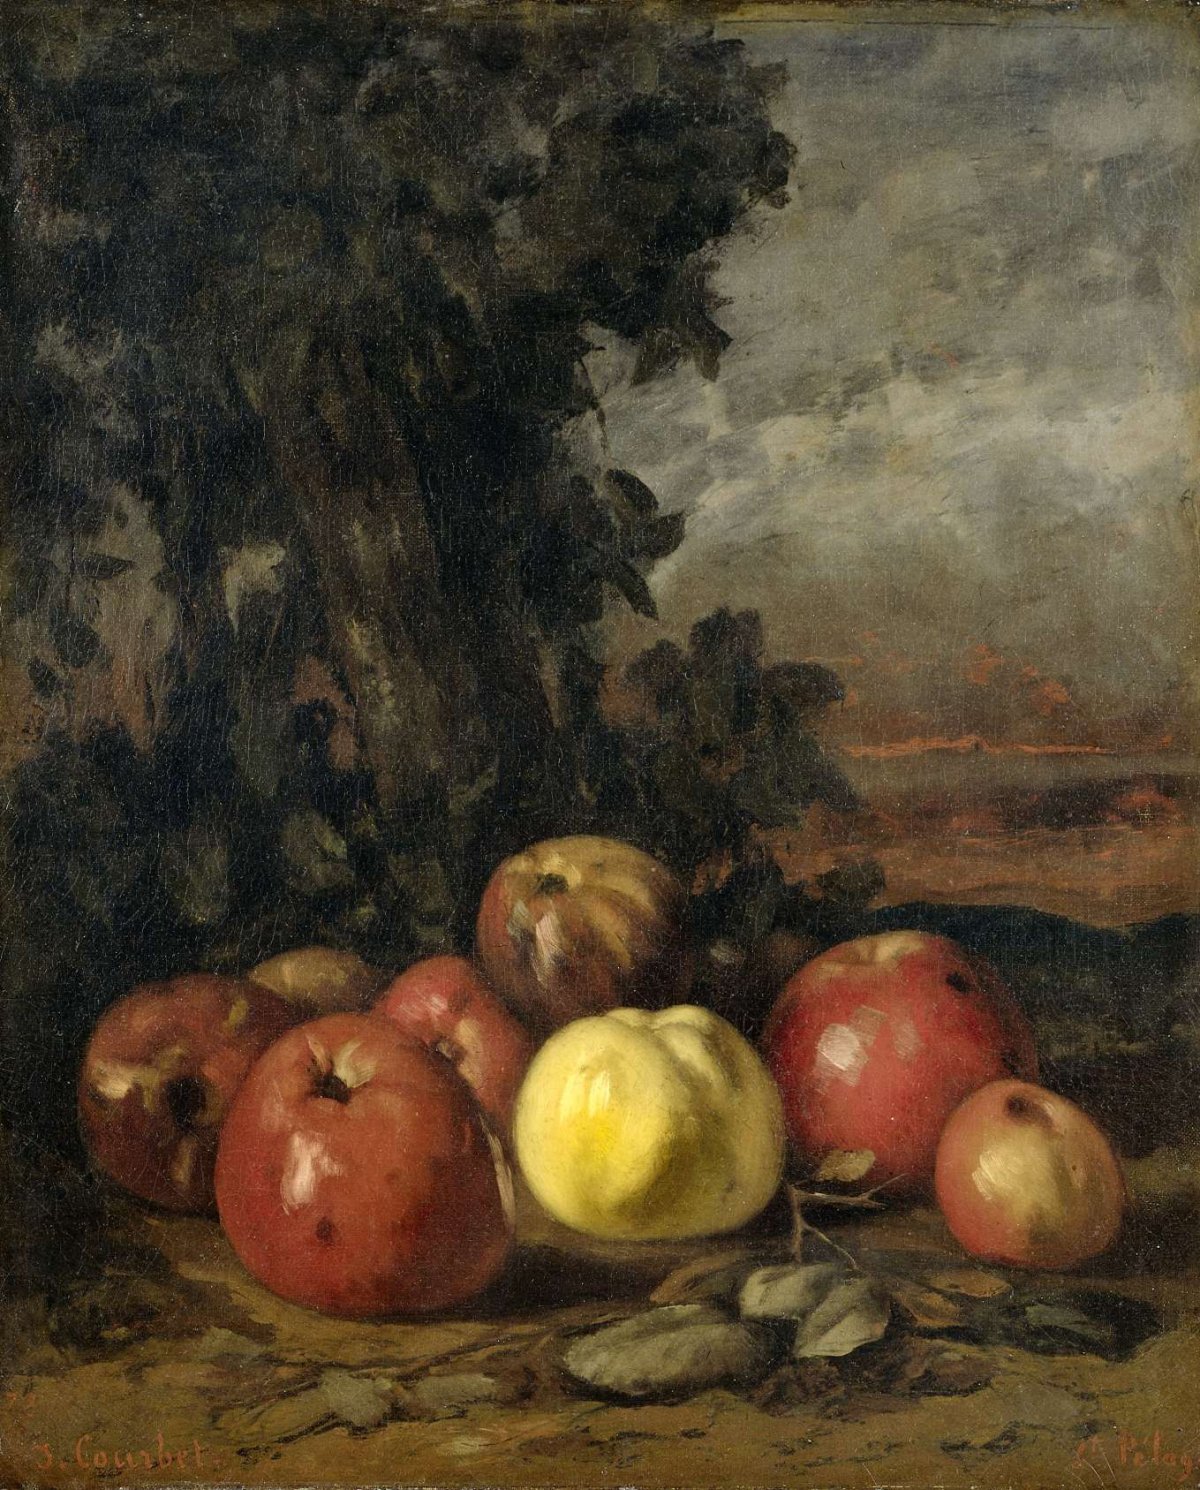 Still Life with Apples, Gustave Courbet, 1871 - 1872